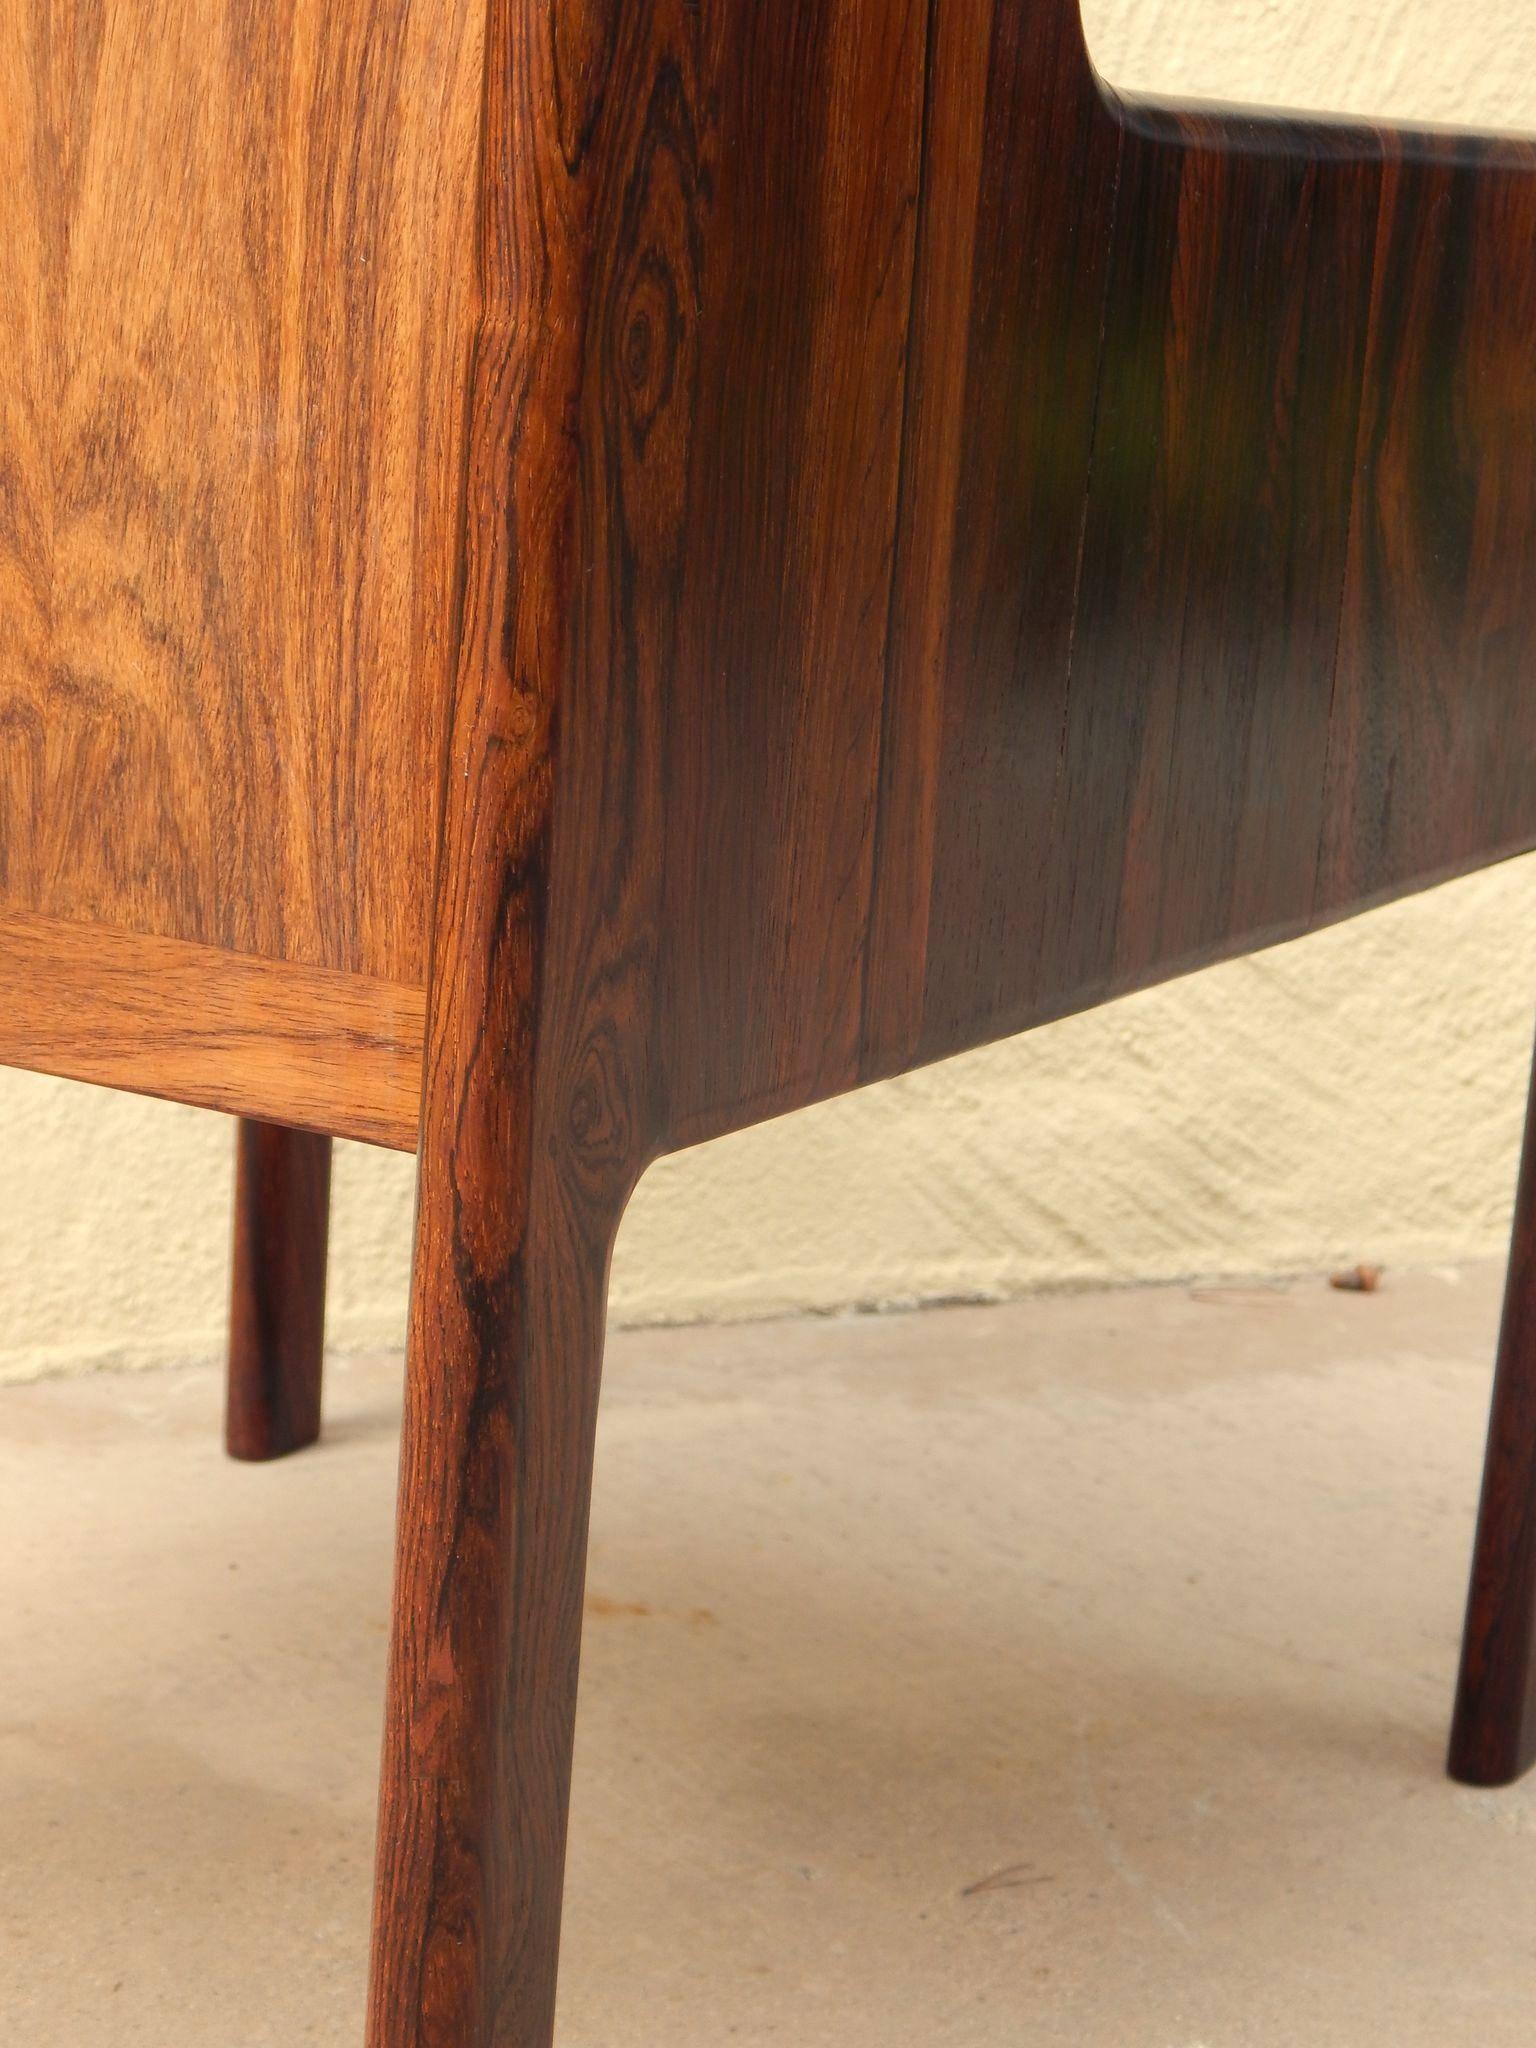 Danish Mid-Century Modern Rosewood Side Table, circa 1960 For Sale 2